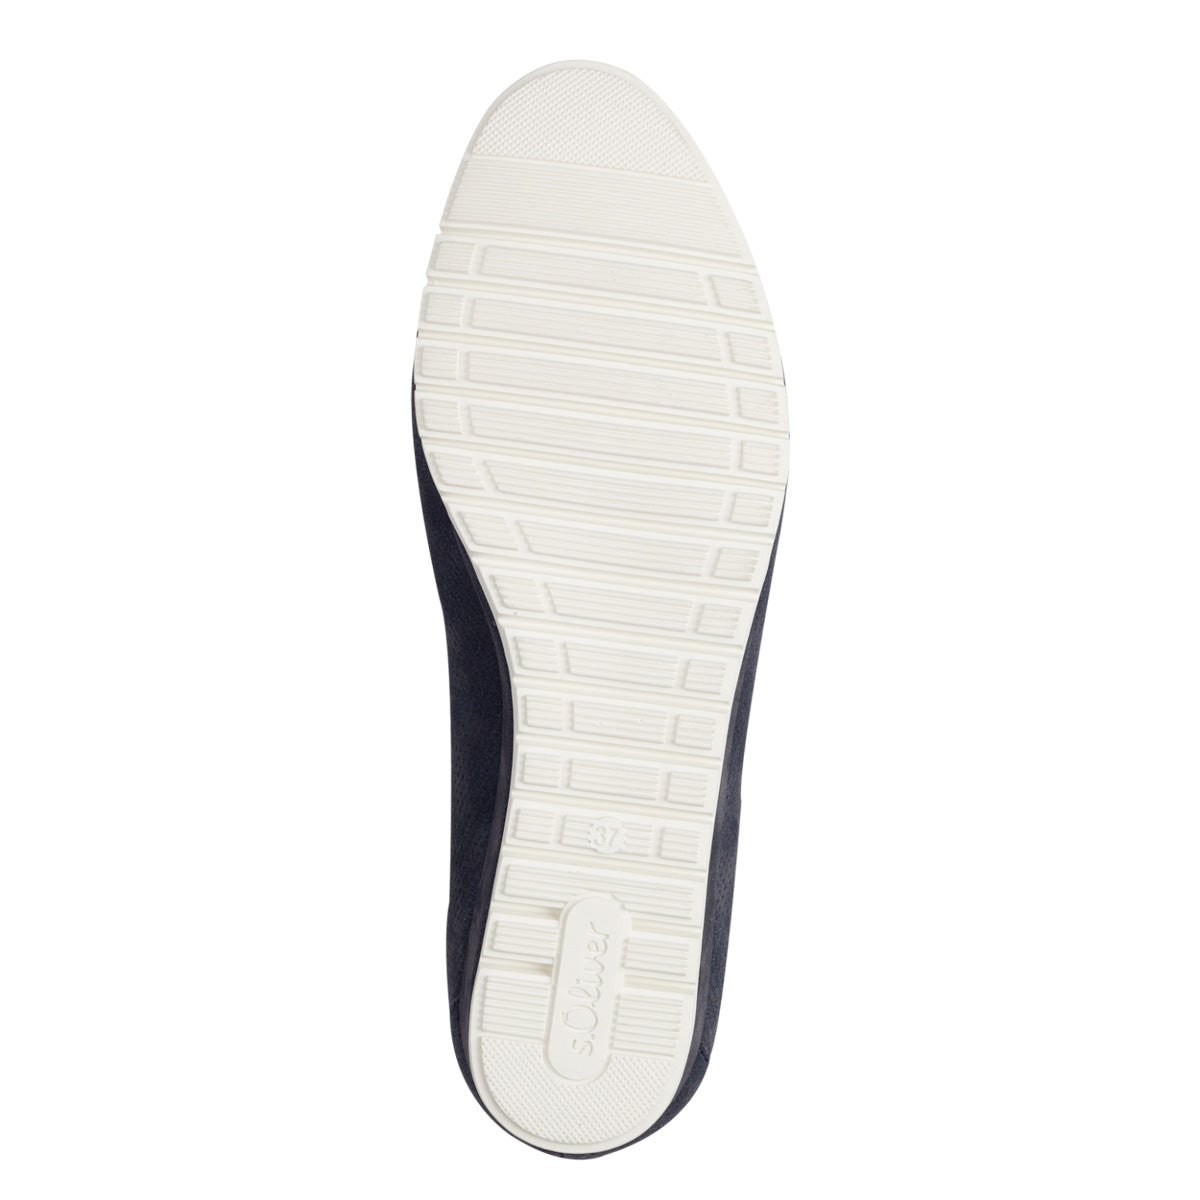 Bottom view of S.Oliver Ballerina Pump revealing the contrasting off-white sole and wedge design.